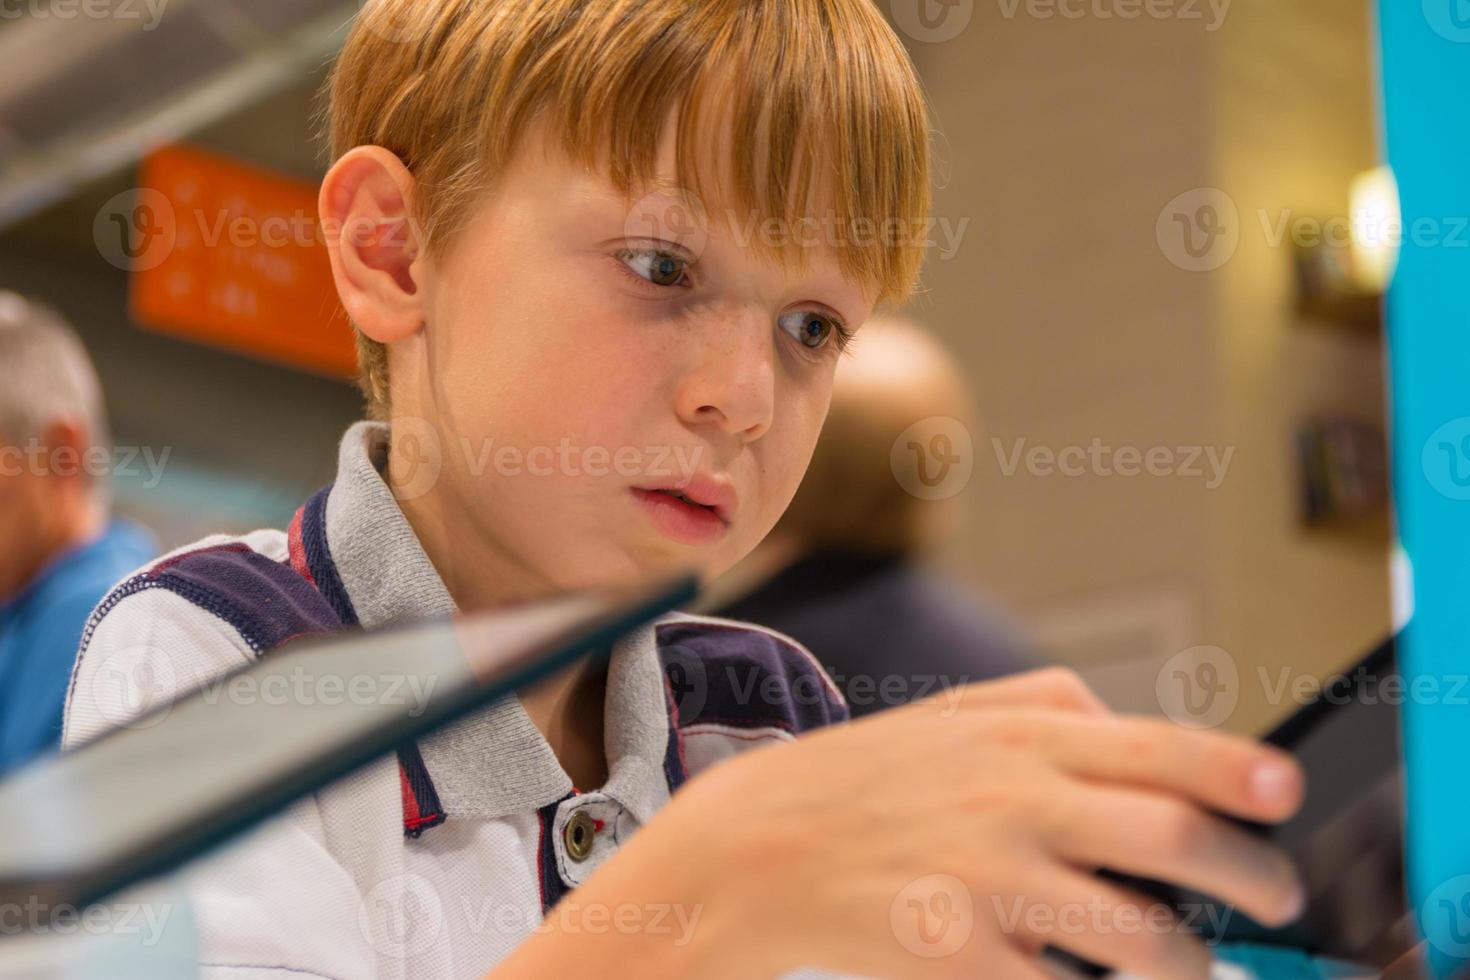 Kid (7-8 years) playing with tablet computer in a shop photo